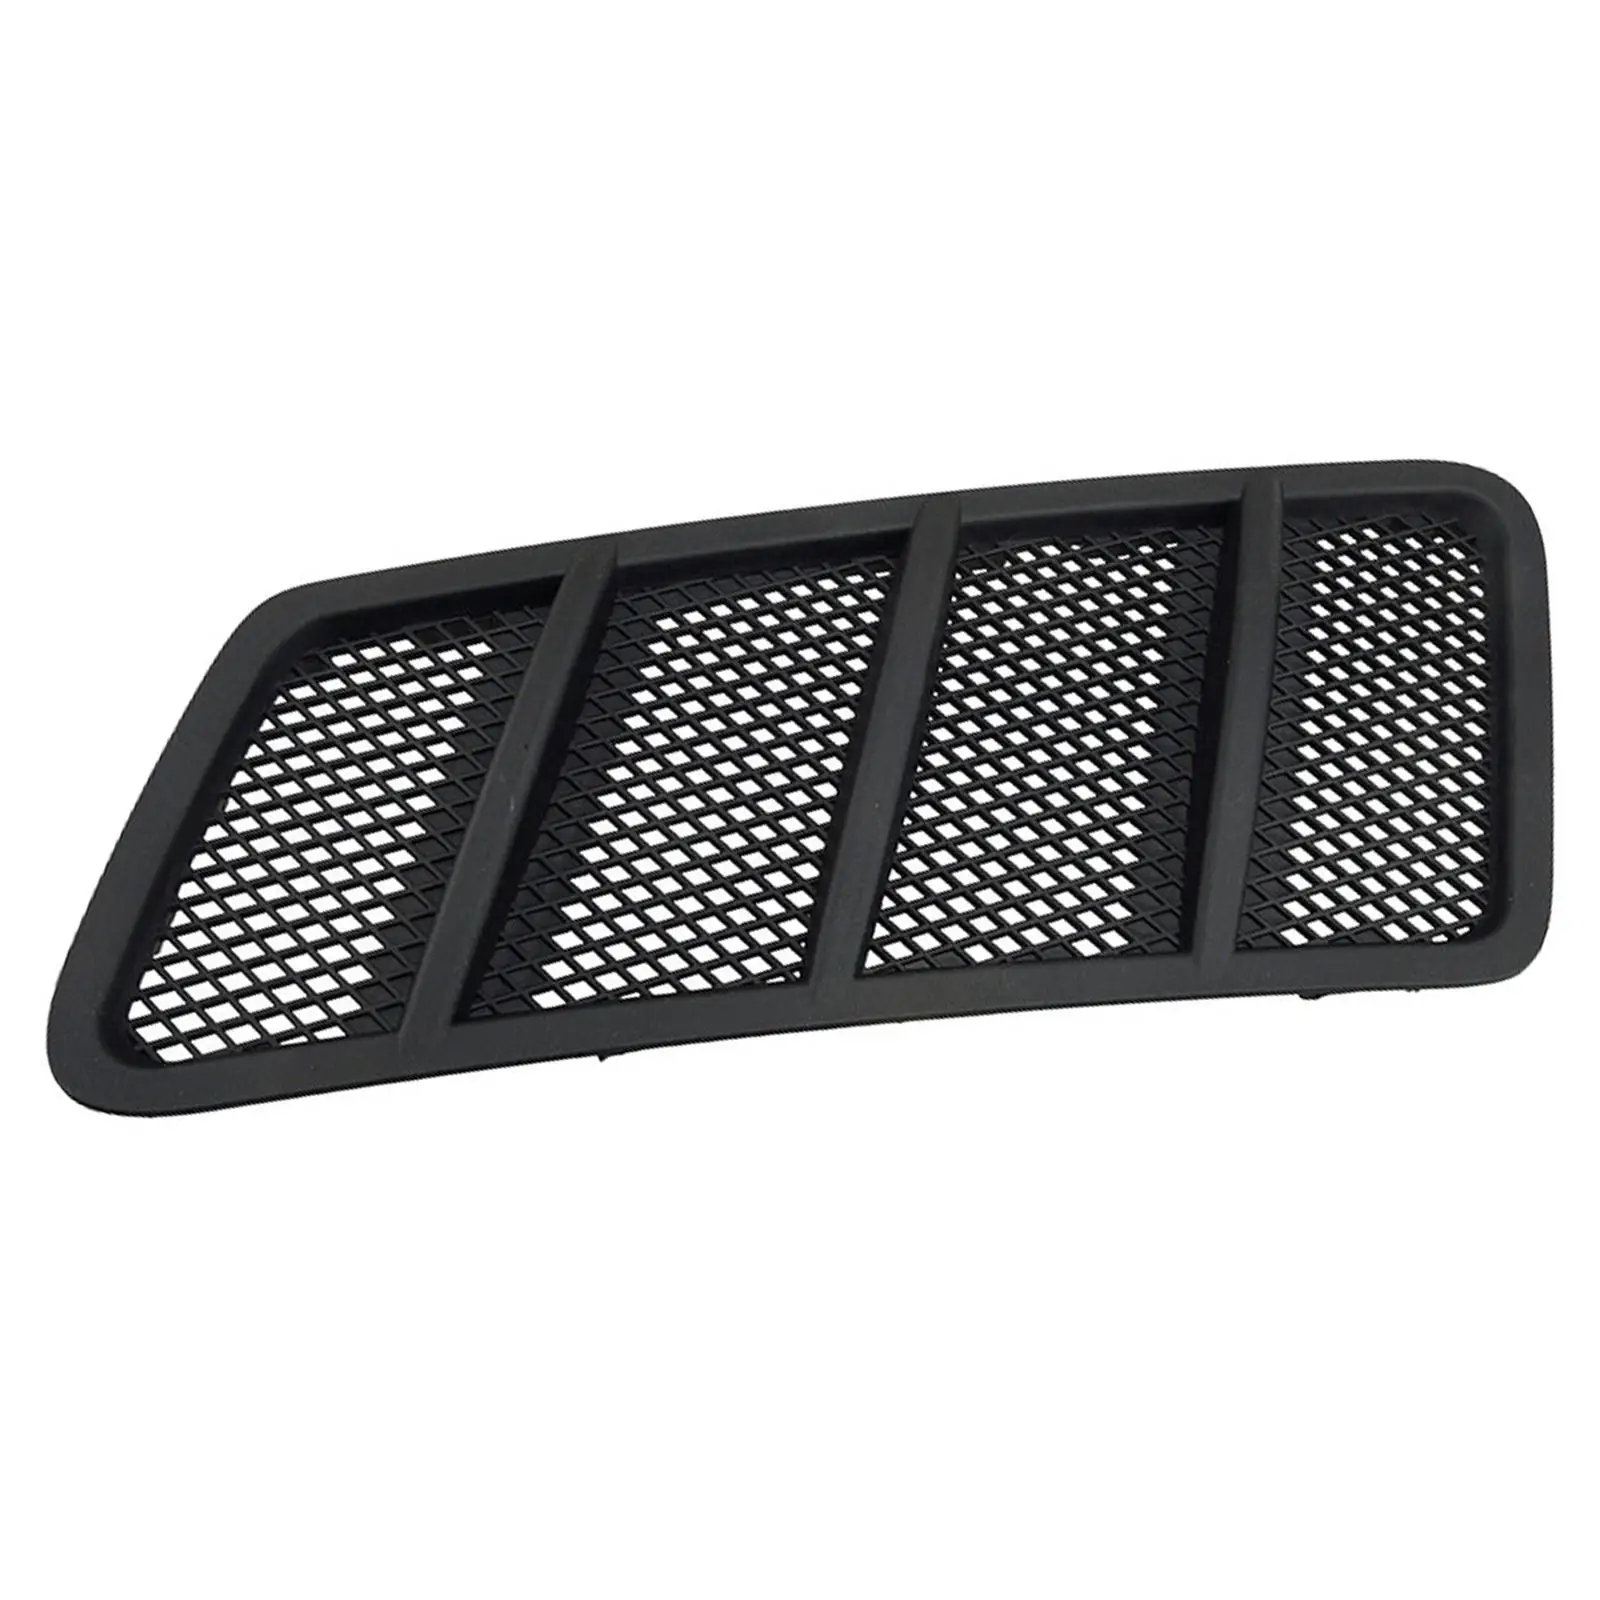 Hood Air Vent Grille Black High Quality Replace High Performance for Mercedes-benz W166 GL450 GL550 GL350 ml550